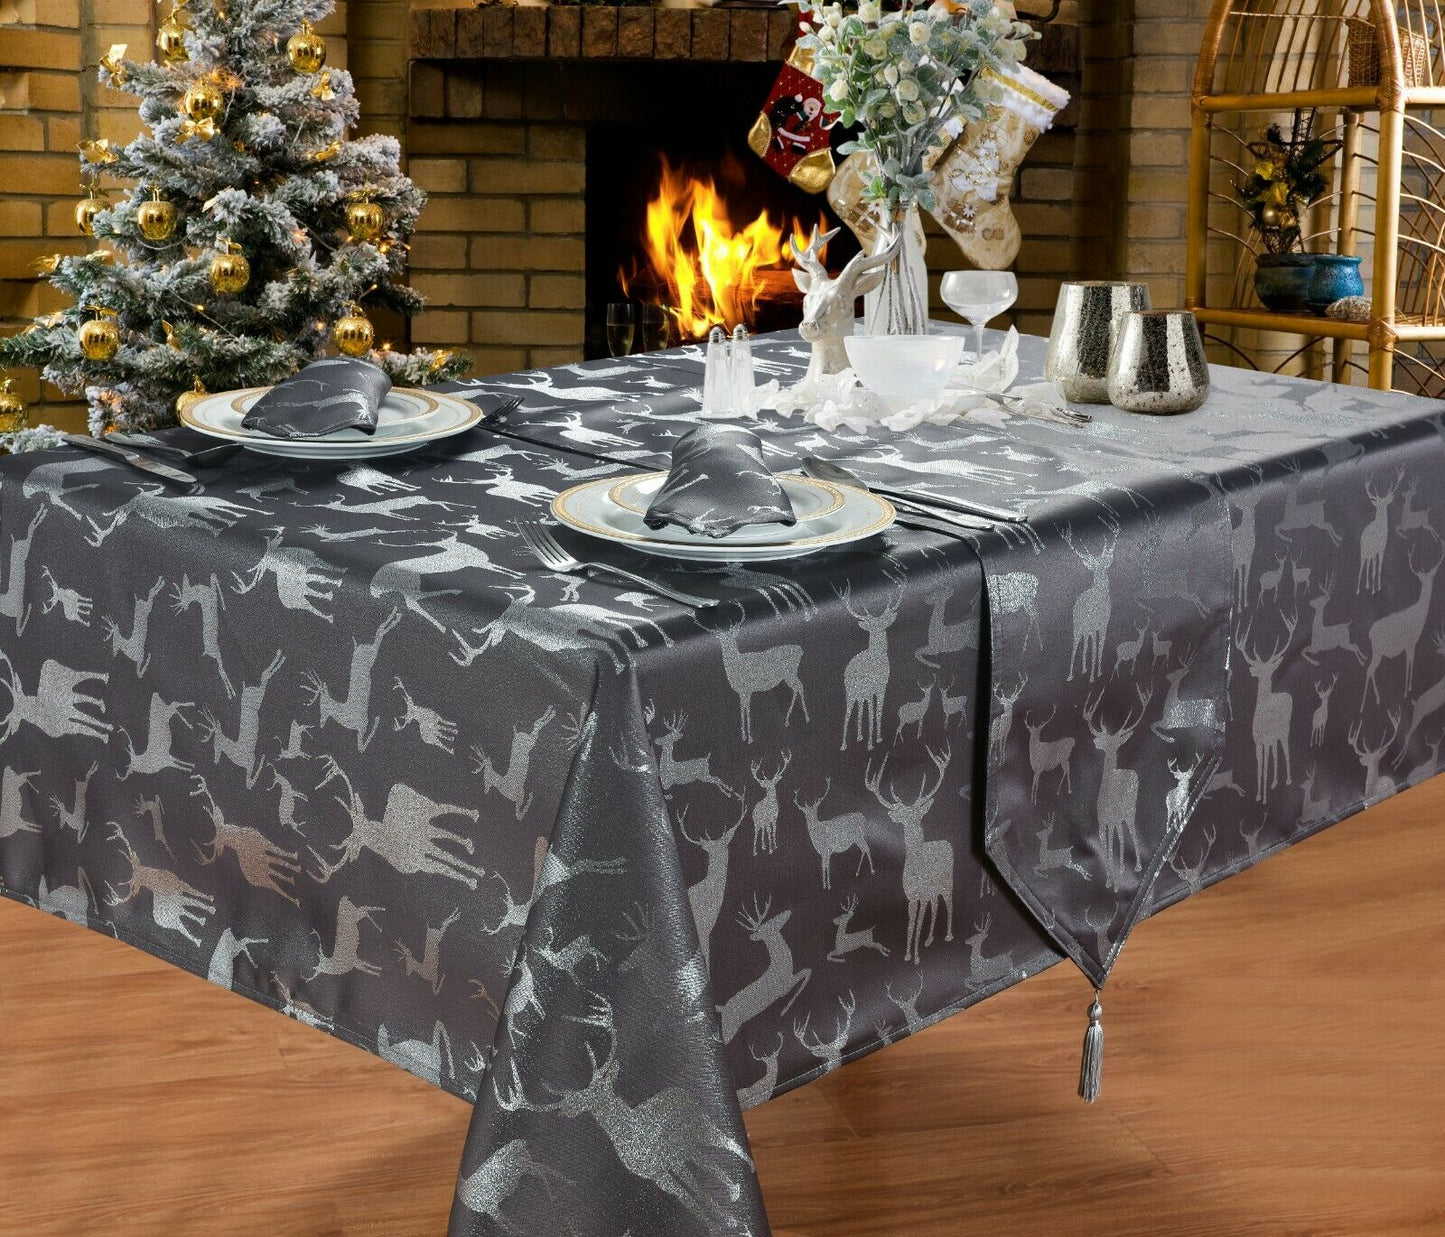 Large Stag Deer Grey Silver 54" x 72" Oblong Tablecloth 4 - 6 Place Setting Festive Dining